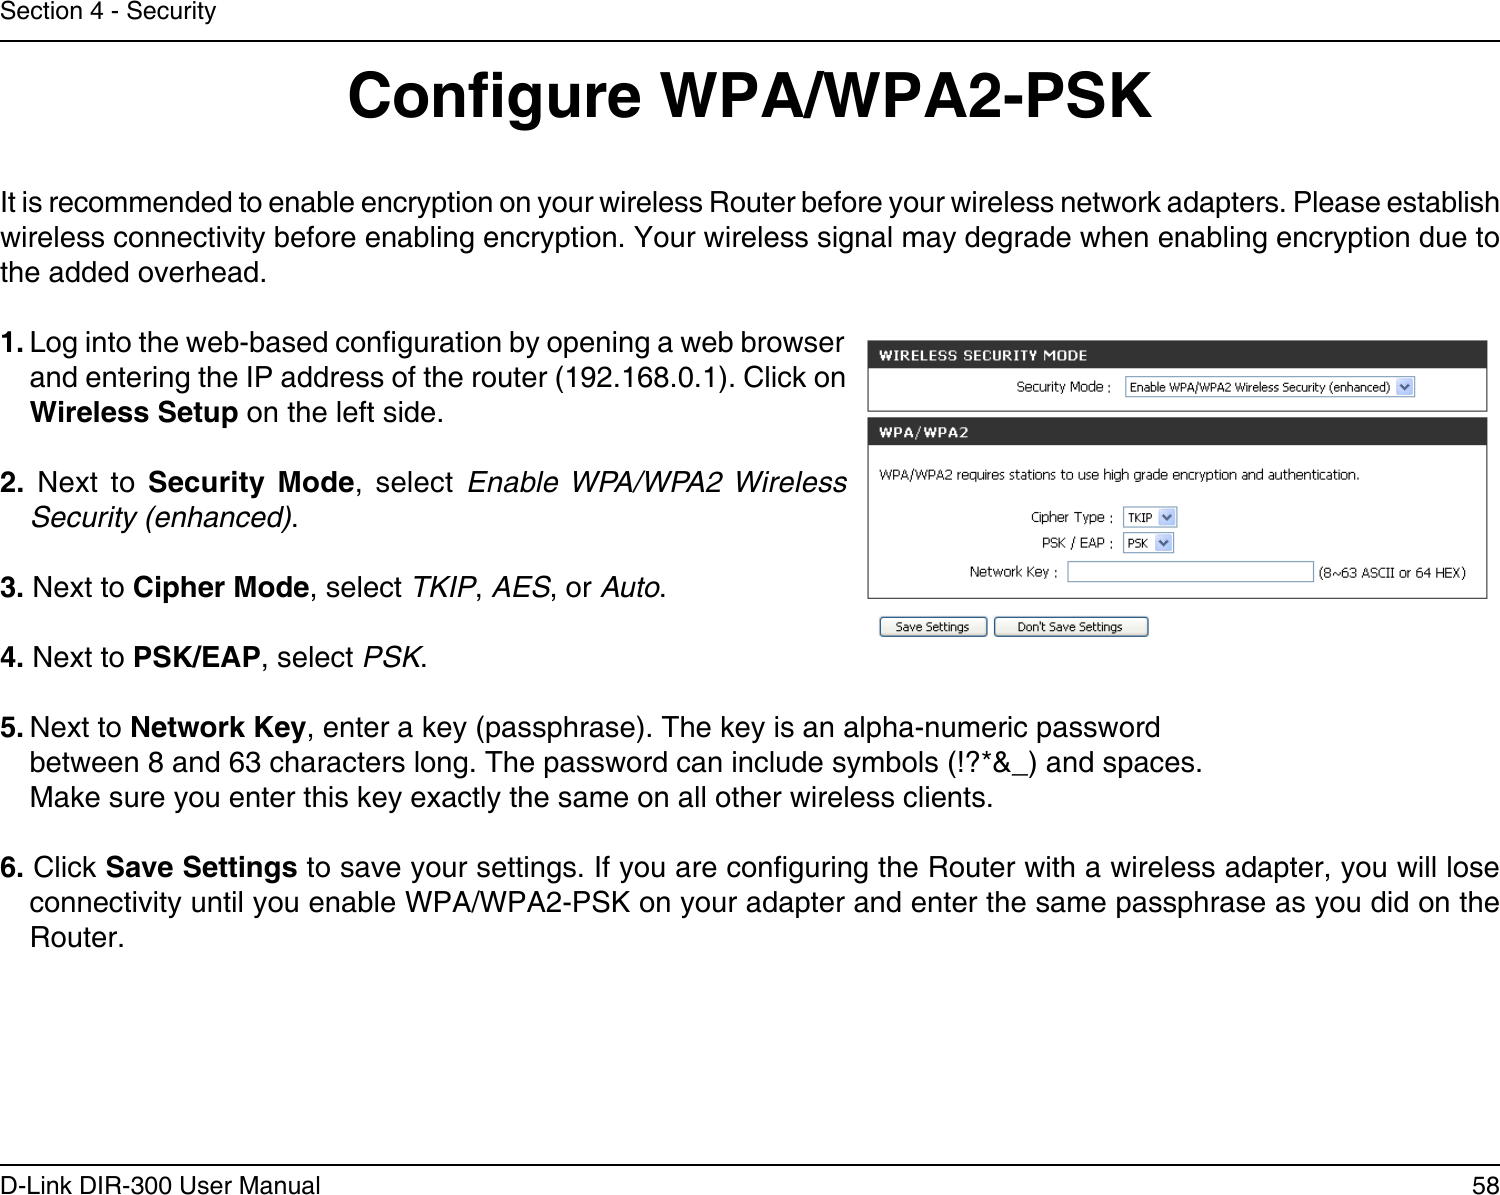 58D-Link DIR-300 User ManualSection 4 - SecurityCongure WPA/WPA2-PSKIt is recommended to enable encryption on your wireless Router before your wireless network adapters. Please establish wireless connectivity before enabling encryption. Your wireless signal may degrade when enabling encryption due to the added overhead.1. Log into the web-based conguration by opening a web browser and entering the IP address of the router (192.168.0.1). Click on Wireless Setup on the left side.2.  Next  to  Security  Mode,  select  Enable WPA/WPA2 Wireless Security (enhanced).3. Next to Cipher Mode, select TKIP, AES, or Auto.4. Next to PSK/EAP, select PSK.5. Next to Network Key, enter a key (passphrase). The key is an alpha-numeric password between 8 and 63 characters long. The password can include symbols (!?*&amp;_) and spaces. Make sure you enter this key exactly the same on all other wireless clients.6. Click Save Settings to save your settings. If you are conguring the Router with a wireless adapter, you will lose connectivity until you enable WPA/WPA2-PSK on your adapter and enter the same passphrase as you did on the Router.